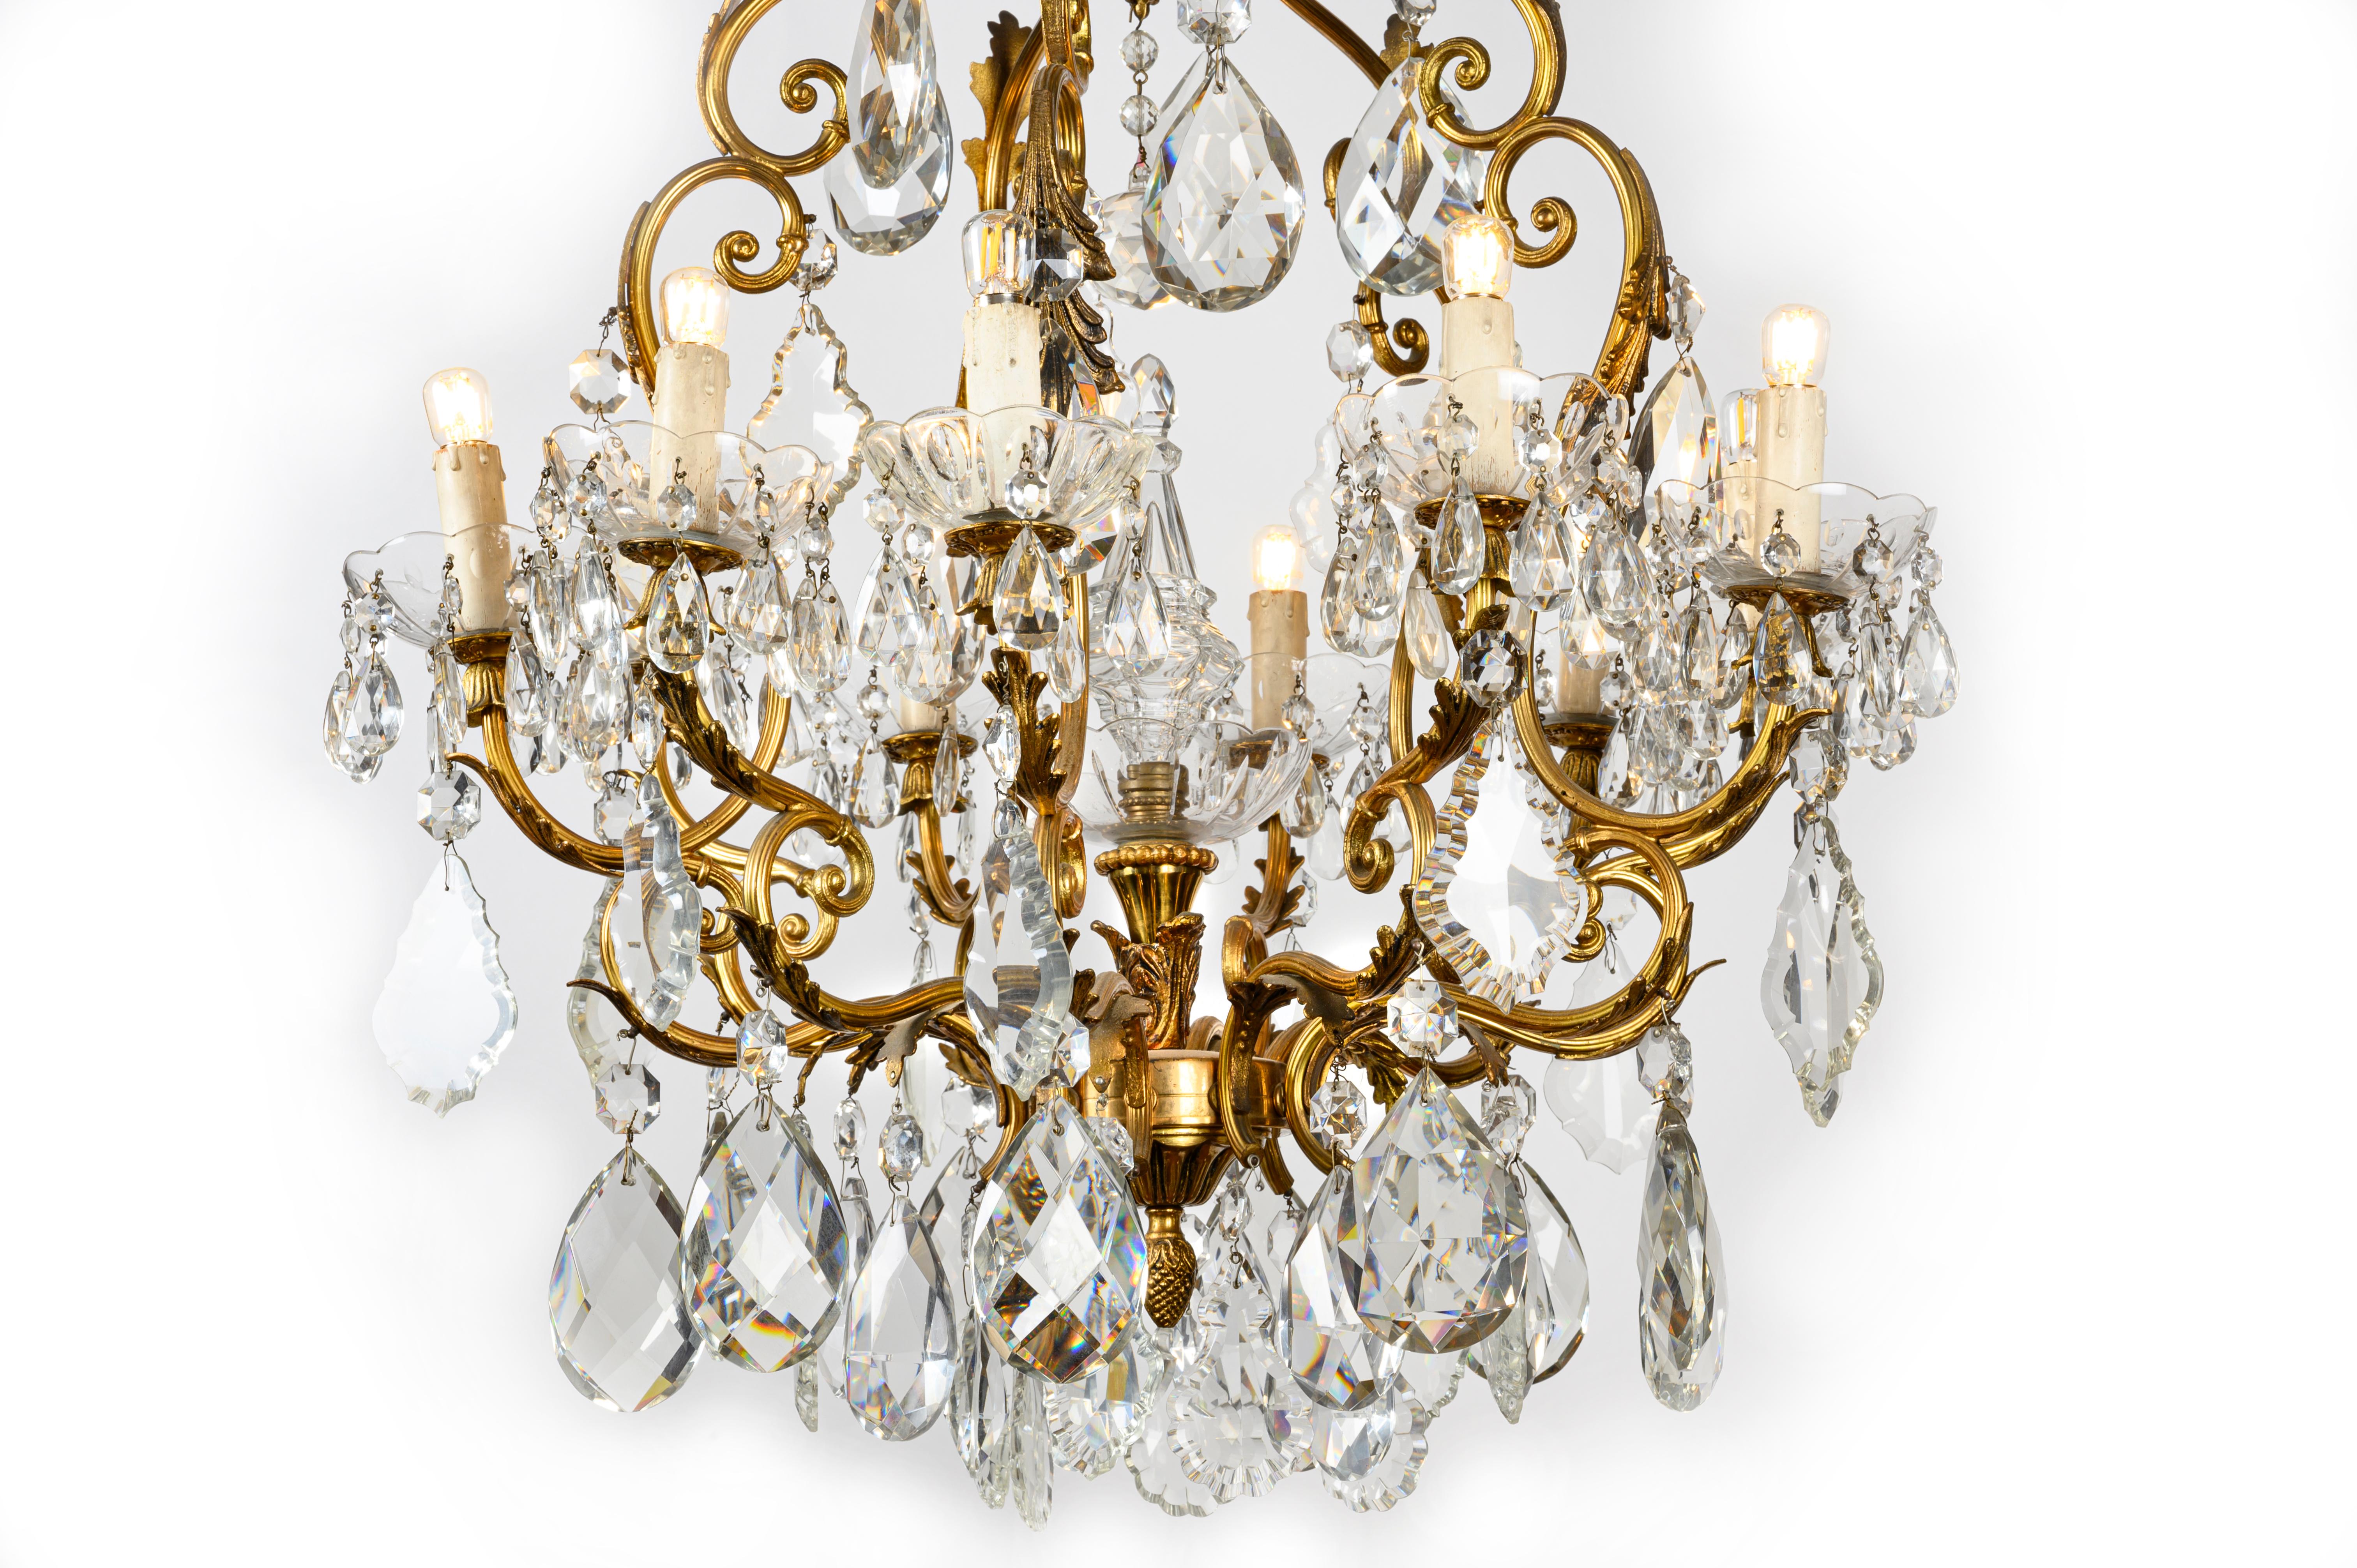 A romantic crystal and gilt bronze chandelier of Italian origin, a ten-light pendant dating back to the mid-20th century, with a beautiful birdcage shaped frame, adorned with cast gilt bronze foliate elements.
The base of the piece features a